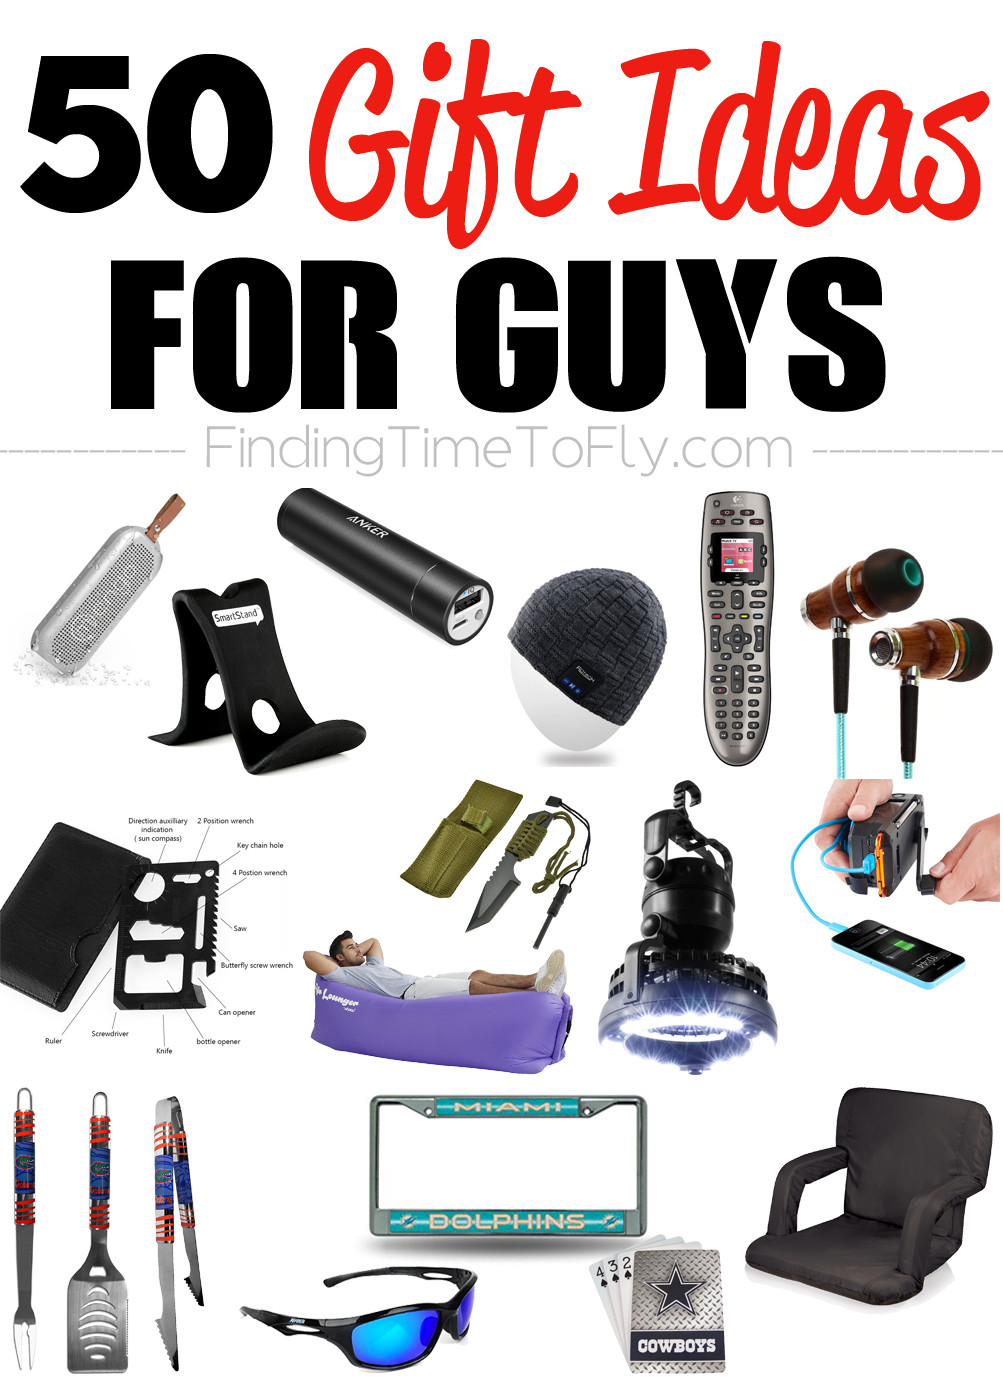 Christmas Gift Ideas For Guys
 50 Gifts for Guys for Every Occasion Finding Time To Fly